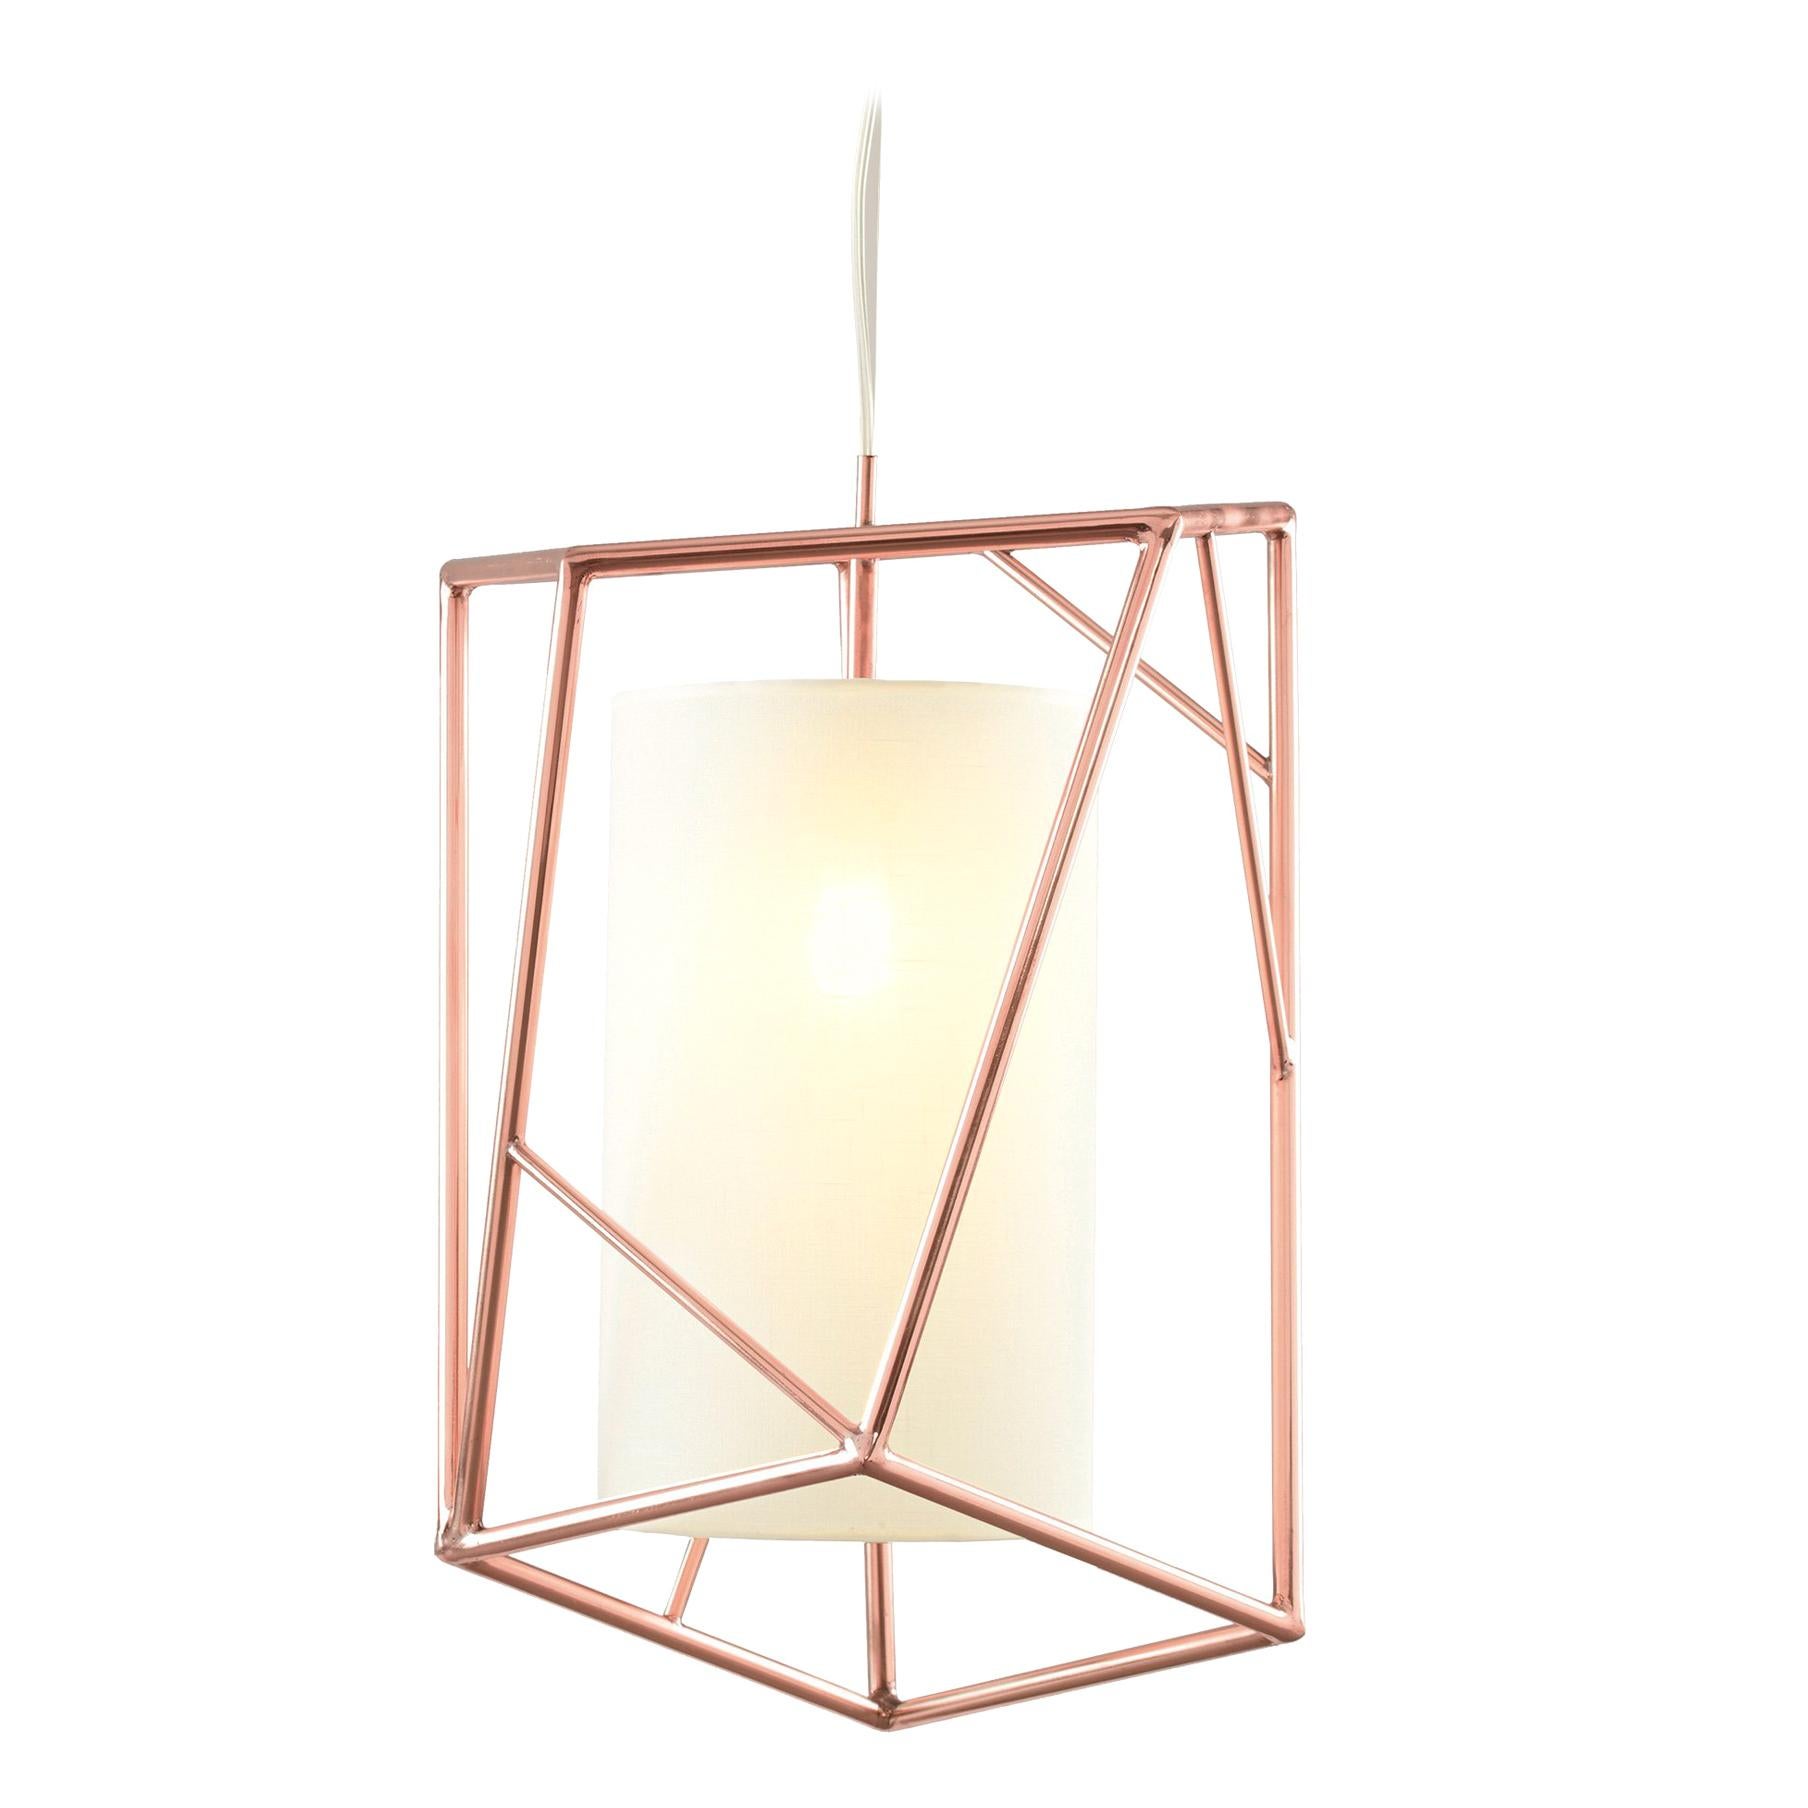 Art Deco Inspired Star III Pendant Lamp Polished Copper and Linen Shade